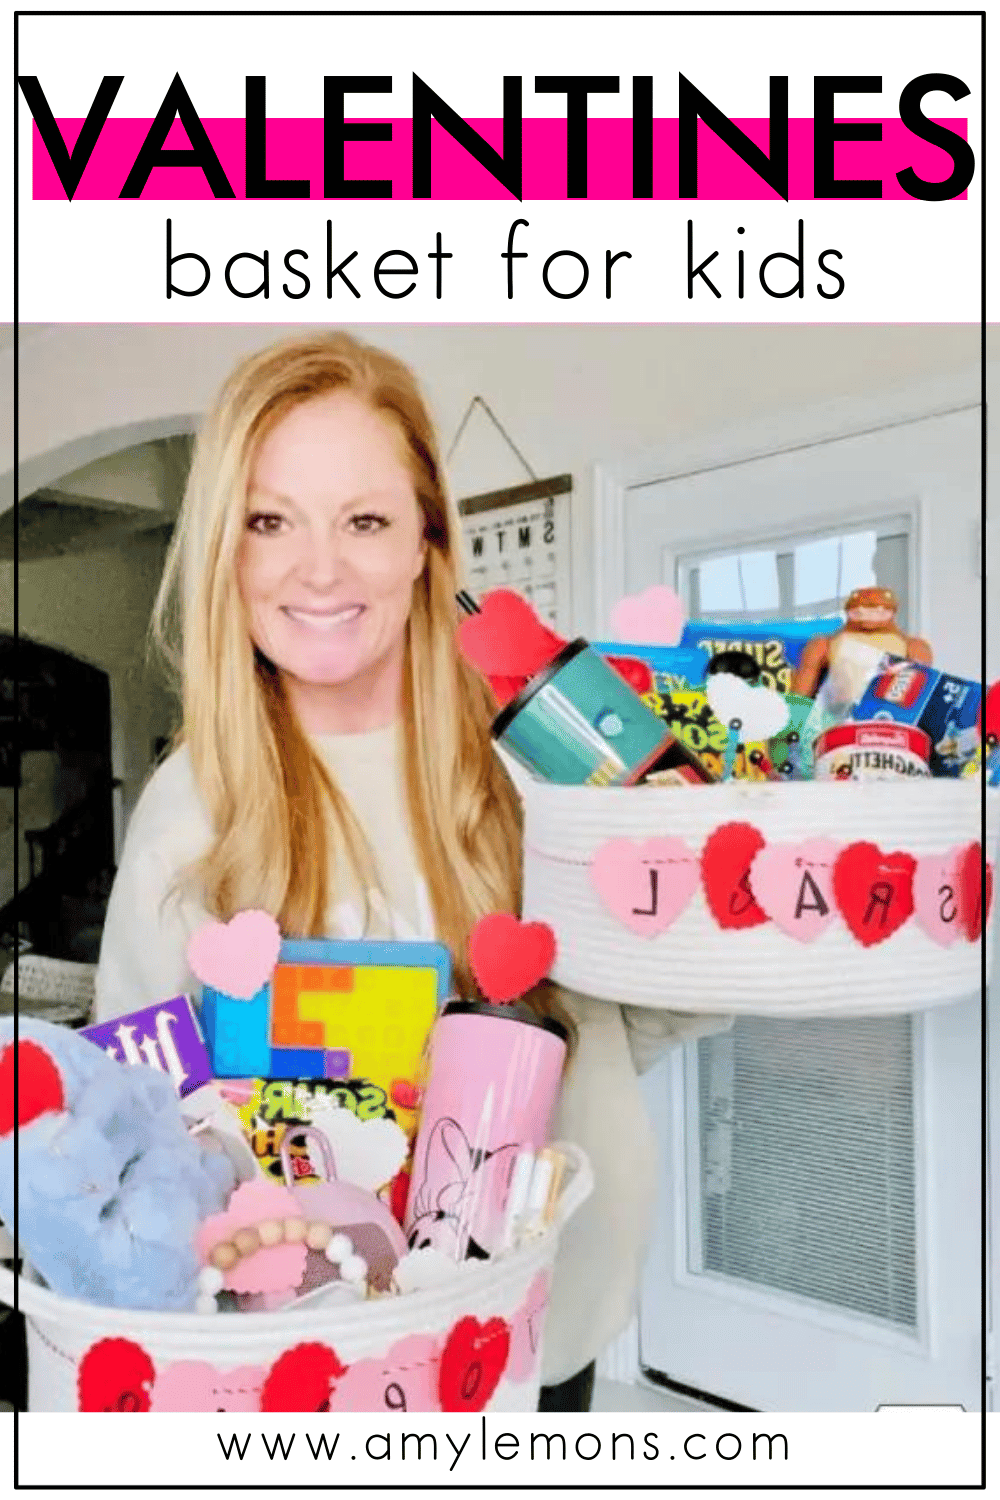 Birthday Gift Baskets for Kids | Birthday Gifts for Kids Delivered